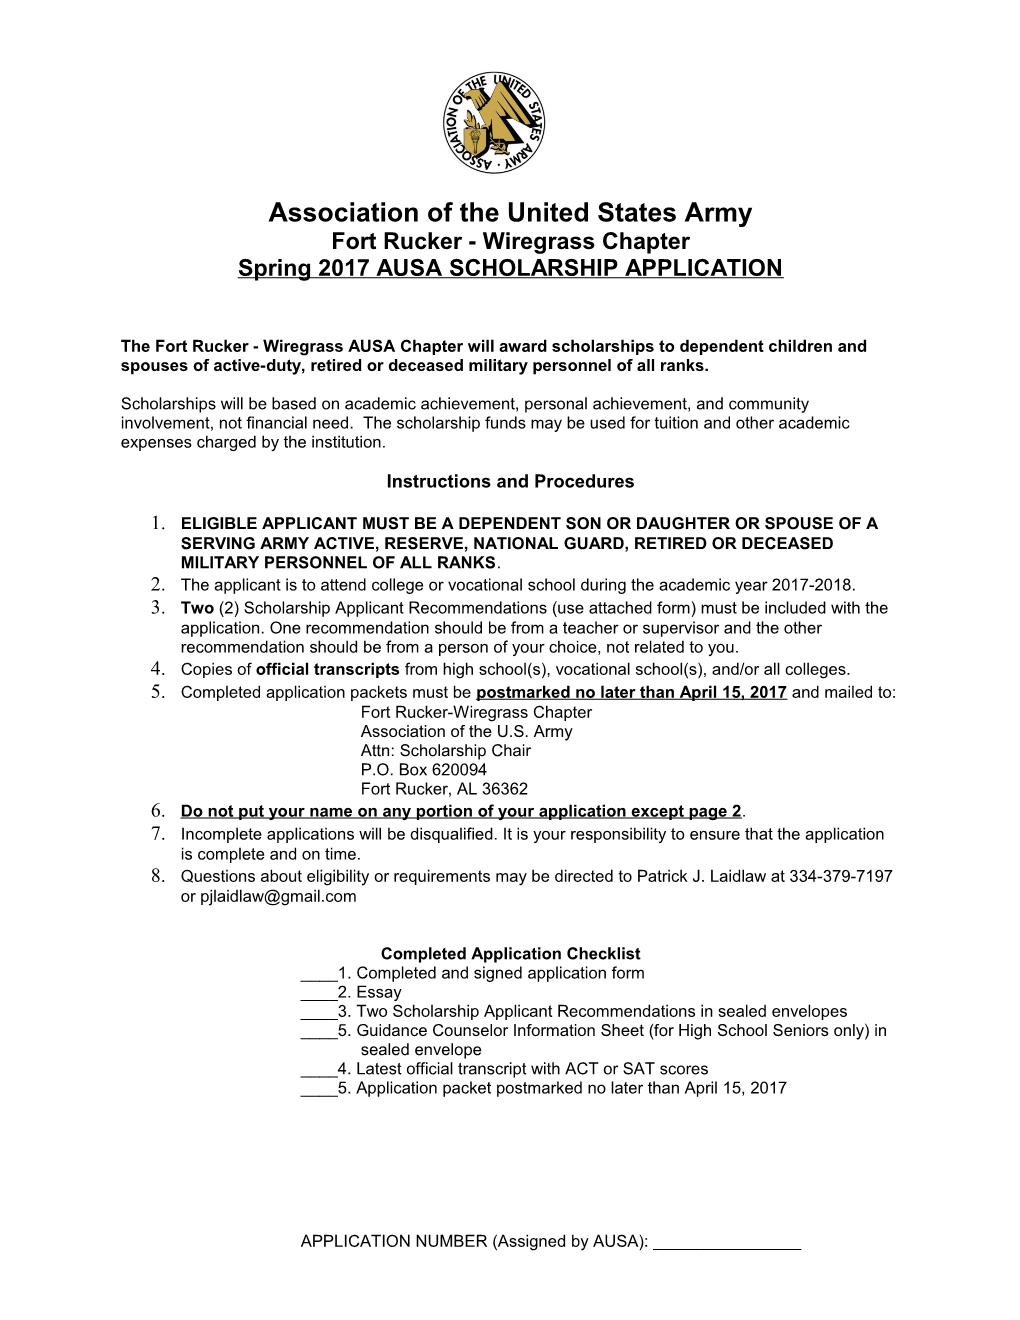 Association of the United States Army Fort Rucker - Wiregrass Chapter